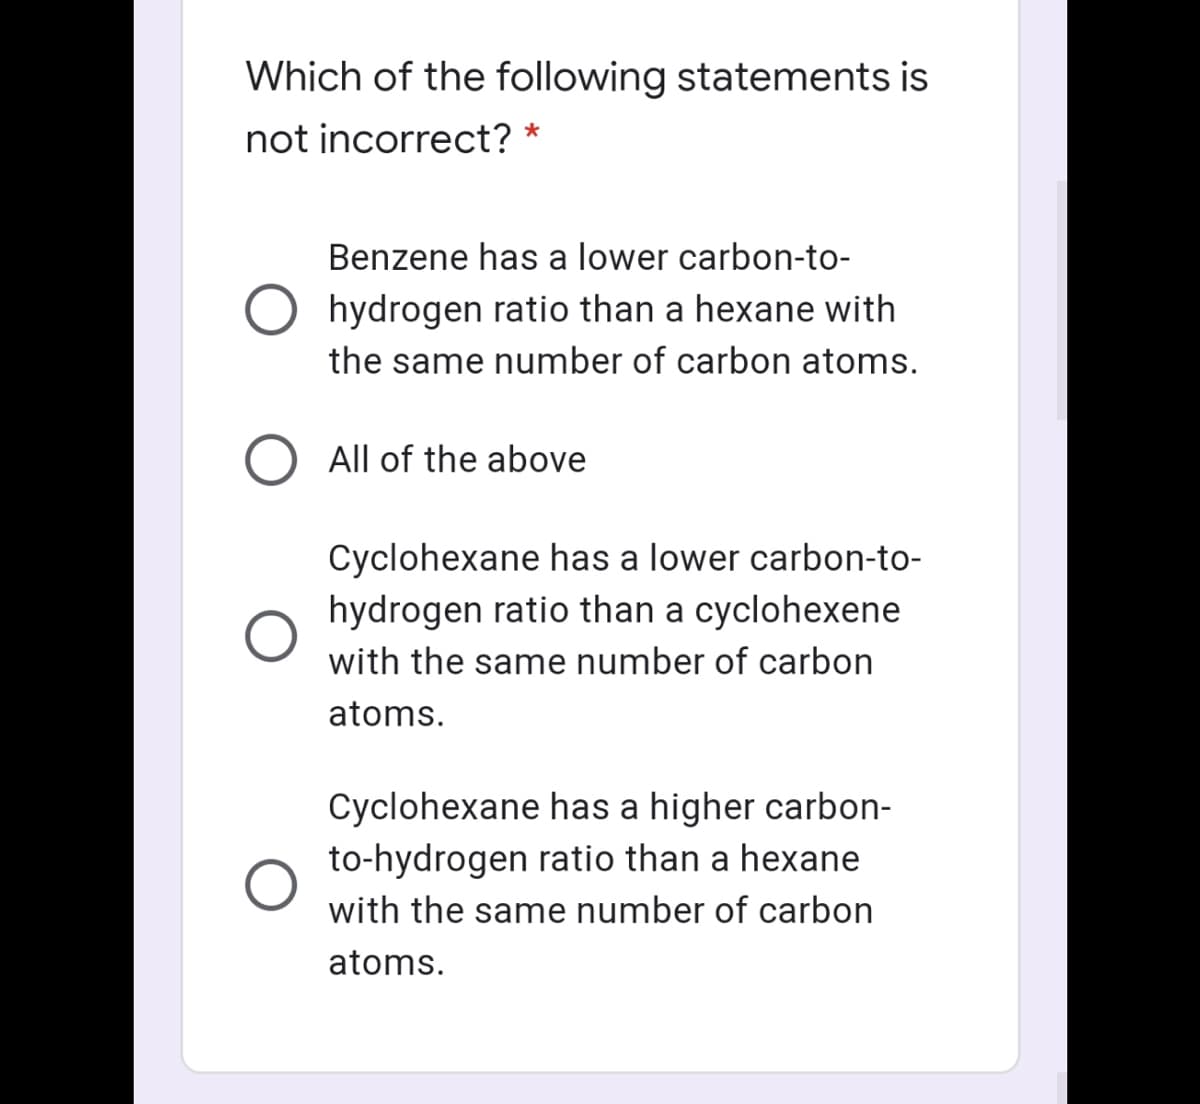 Which of the following statements is
not incorrect?
Benzene has a lower carbon-to-
hydrogen ratio than a hexane with
the same number of carbon atoms.
All of the above
Cyclohexane has a lower carbon-to-
hydrogen ratio than a cyclohexene
with the same number of carbon
atoms.
Cyclohexane has a higher carbon-
to-hydrogen ratio than a hexane
with the same number of carbon
atoms.
